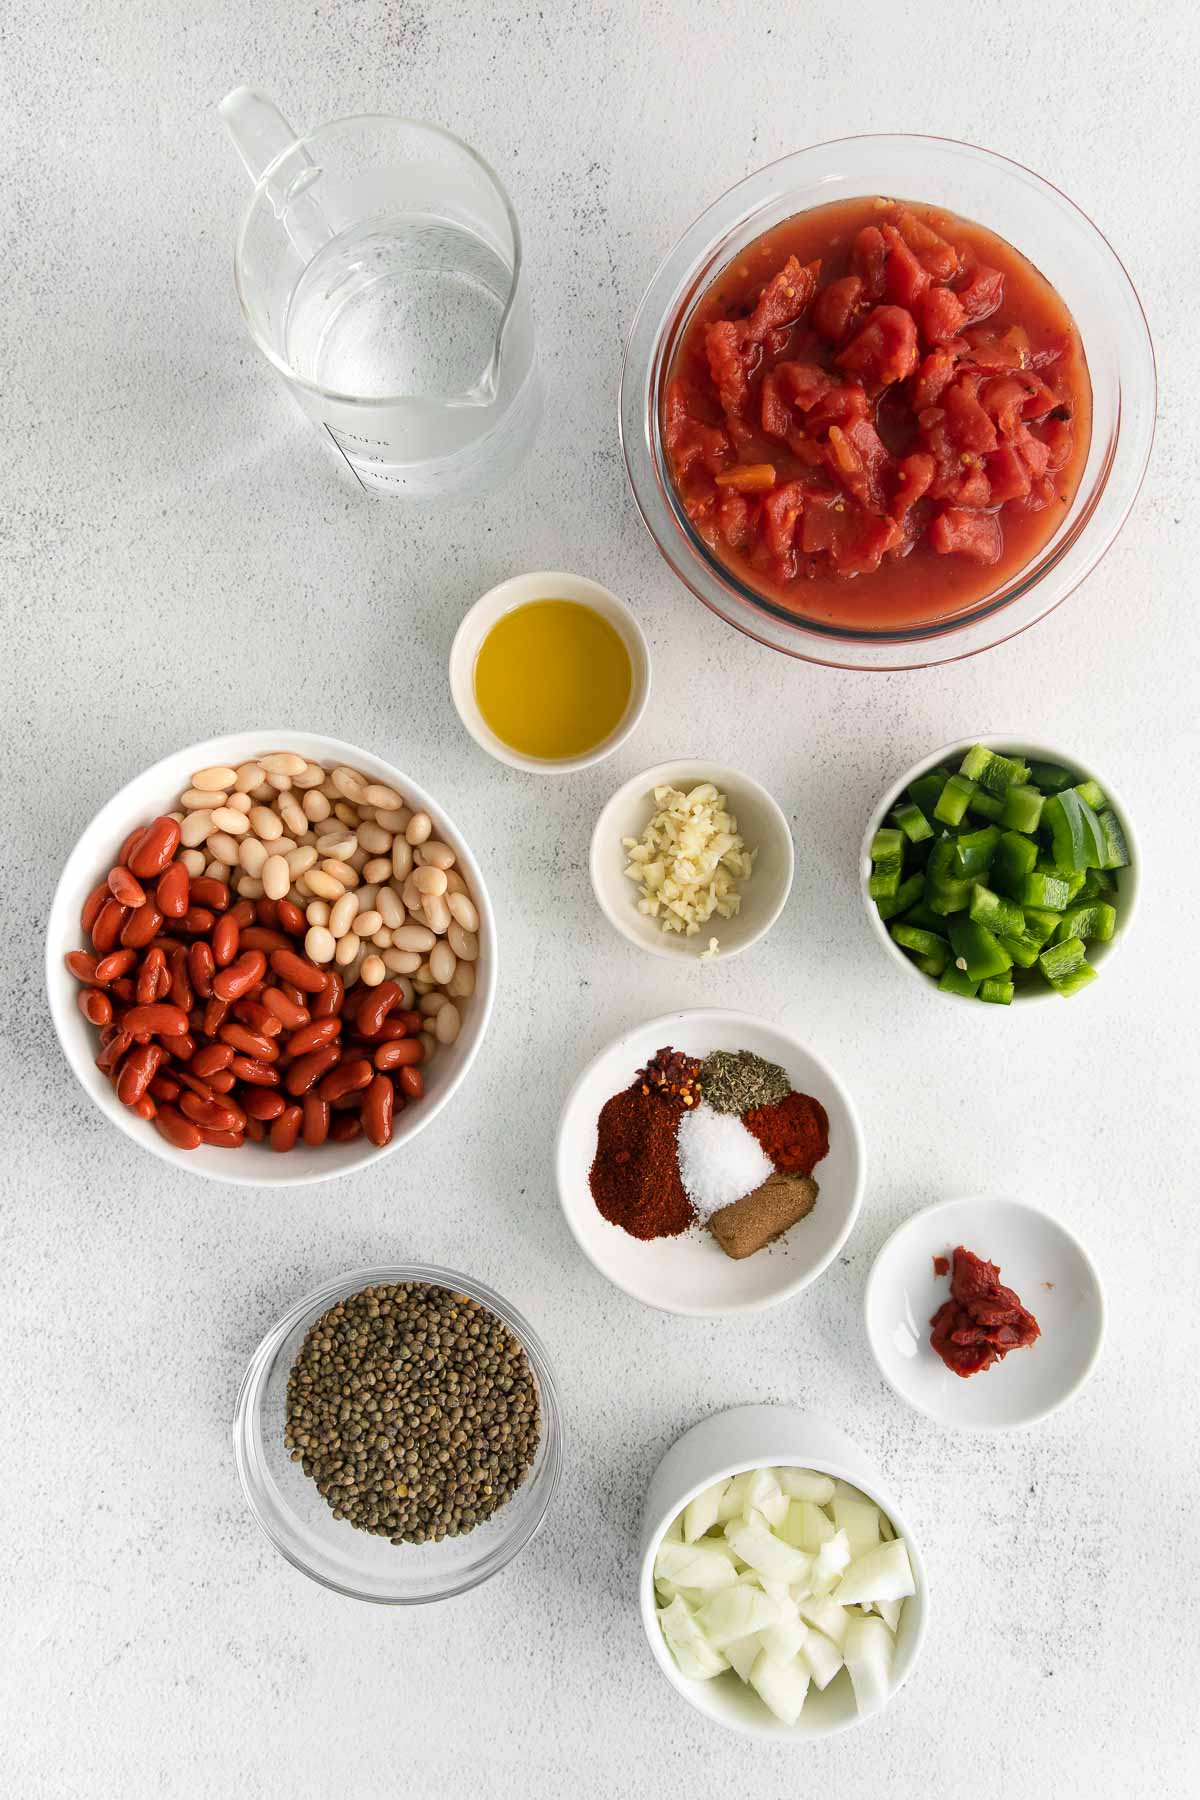 several small white and glass bowls full of ingredients for lentil chili - beans, diced onion, lentils, diced tomatoes, spices, garlic, and diced green peppers